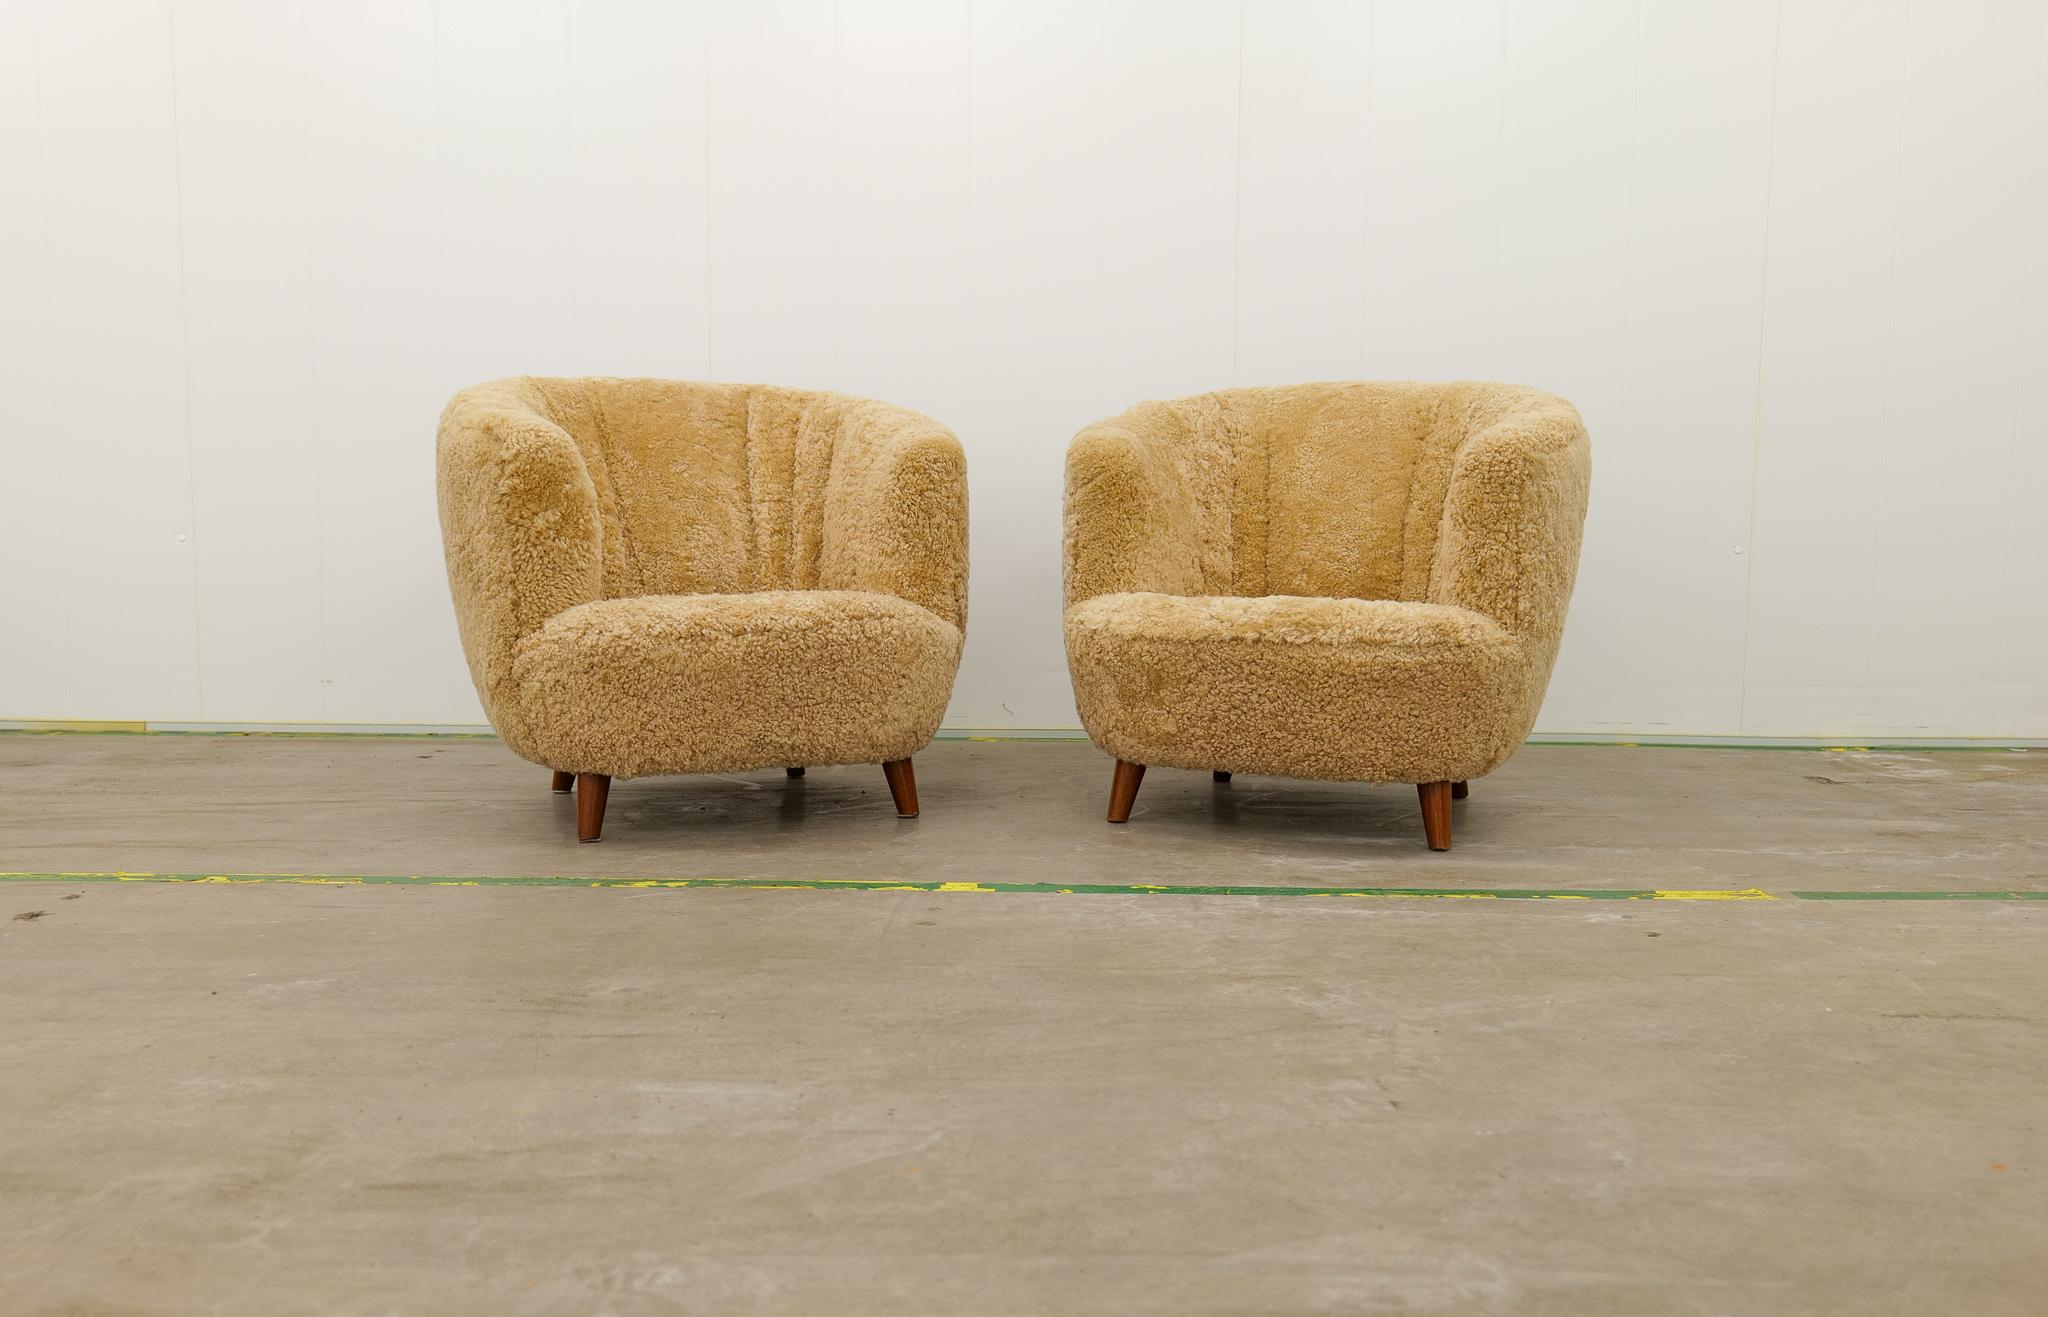 These two wonderfully rounded crafted chairs were made in Norway 1940s and design by Peter Iversen Langlo. The chairs made with stained birch legs and honey colored sheepskin-shearling has been redone with all new upholstery with quality